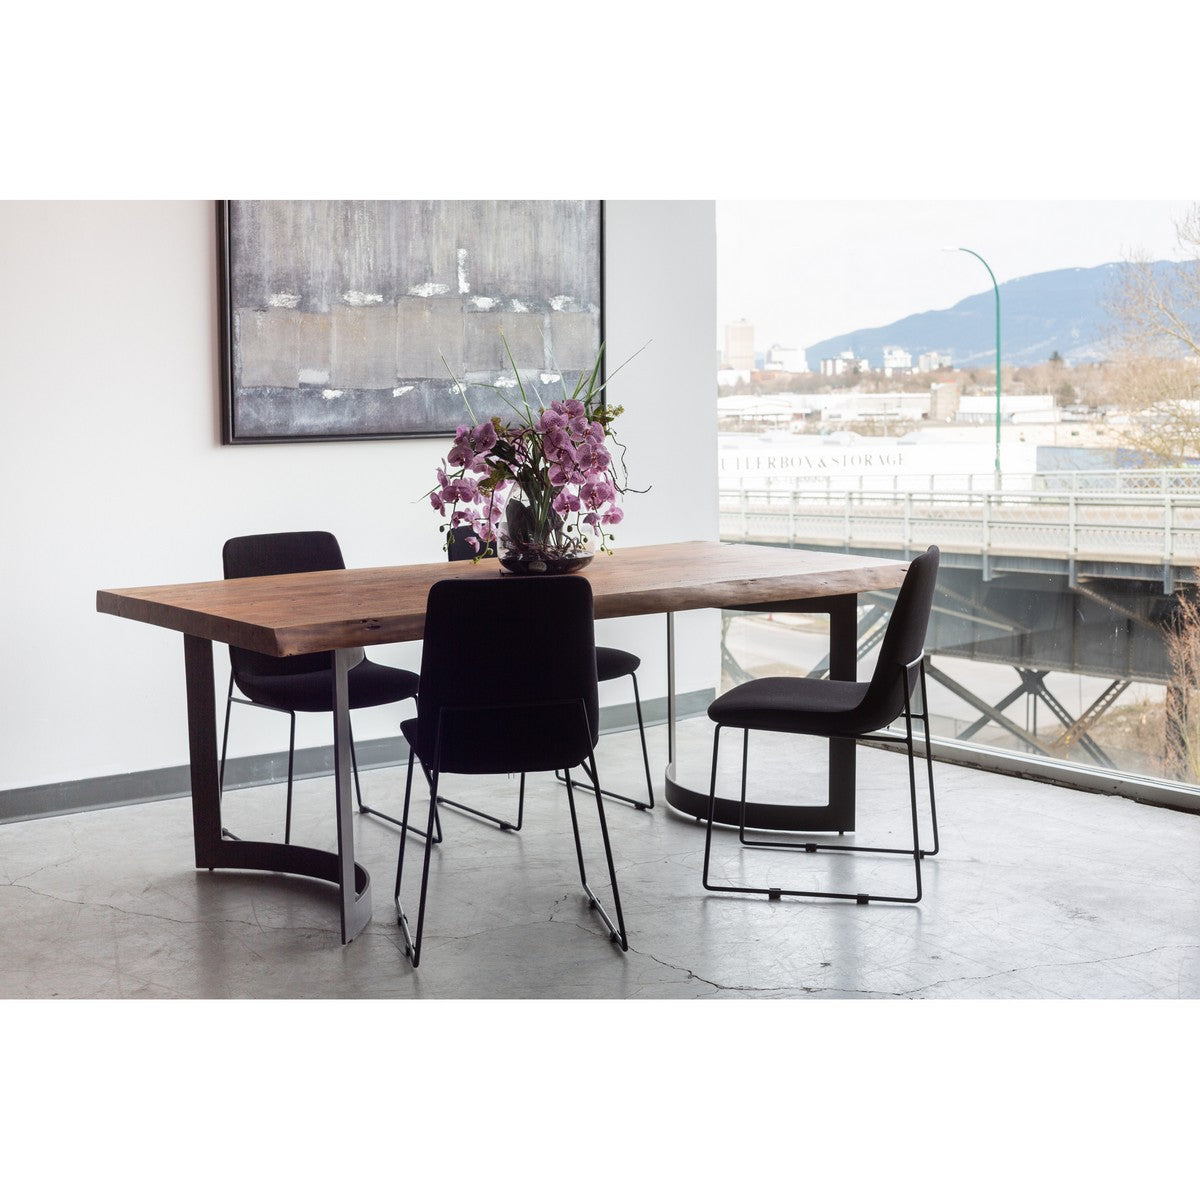 Moe's Home Collection Bent Dining Table Extra Small Smoked - VE-1036-03 - Moe's Home Collection - Dining Tables - Minimal And Modern - 1